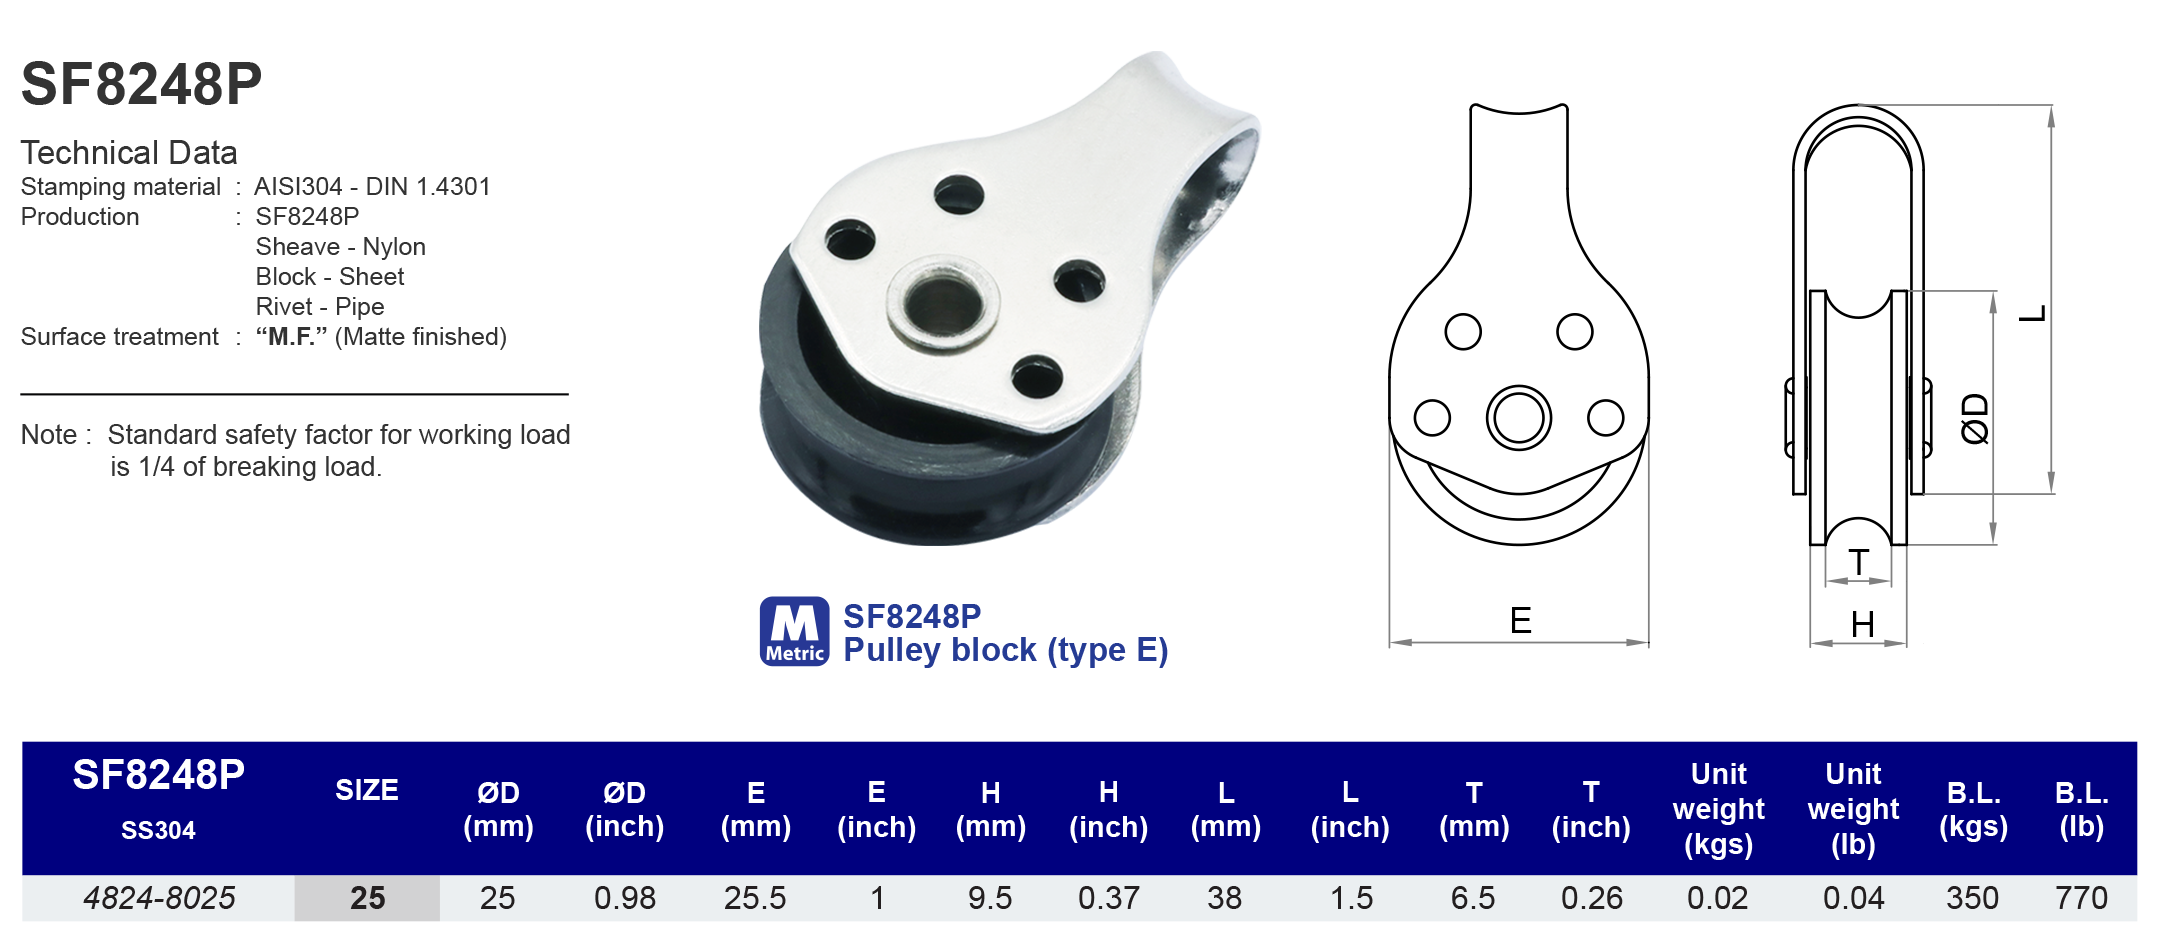 SF8248P Pulley block (type E) - 304